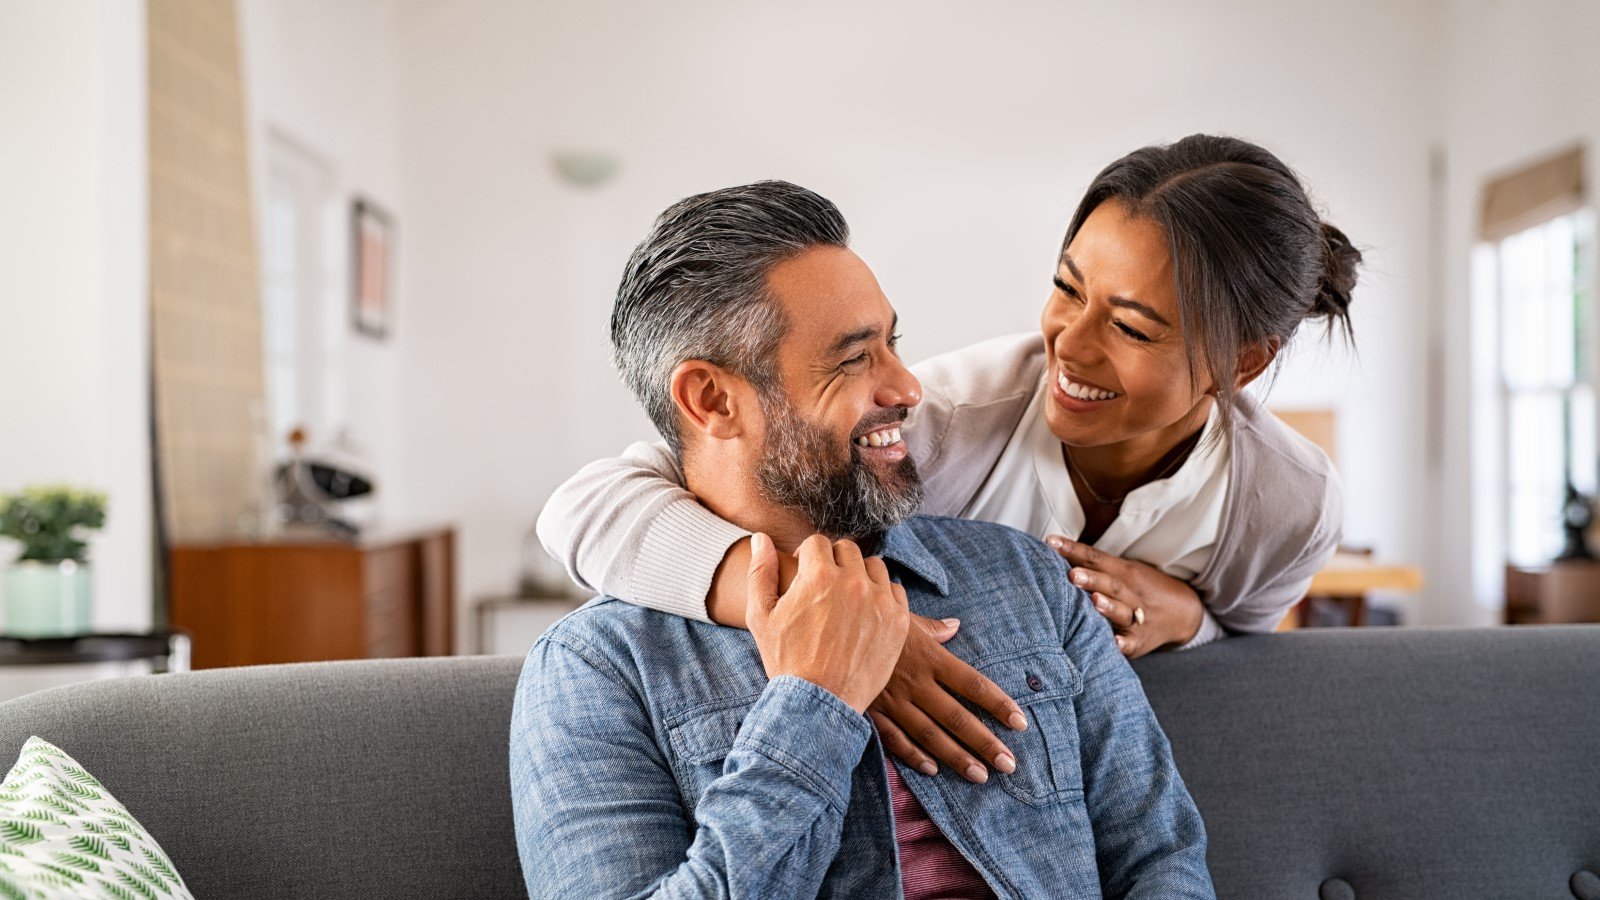 <p><span>When money is tight, staying home with your partner and binge-watch shows or scrolling endlessly on your phone is tempting. But a healthy relationship requires actively doing things together. </span></p> <p><span>Even when money is tight, there are options available! Be romantic and show up for your partner. Here are 18 great date ideas that cost little to nothing.</span></p>